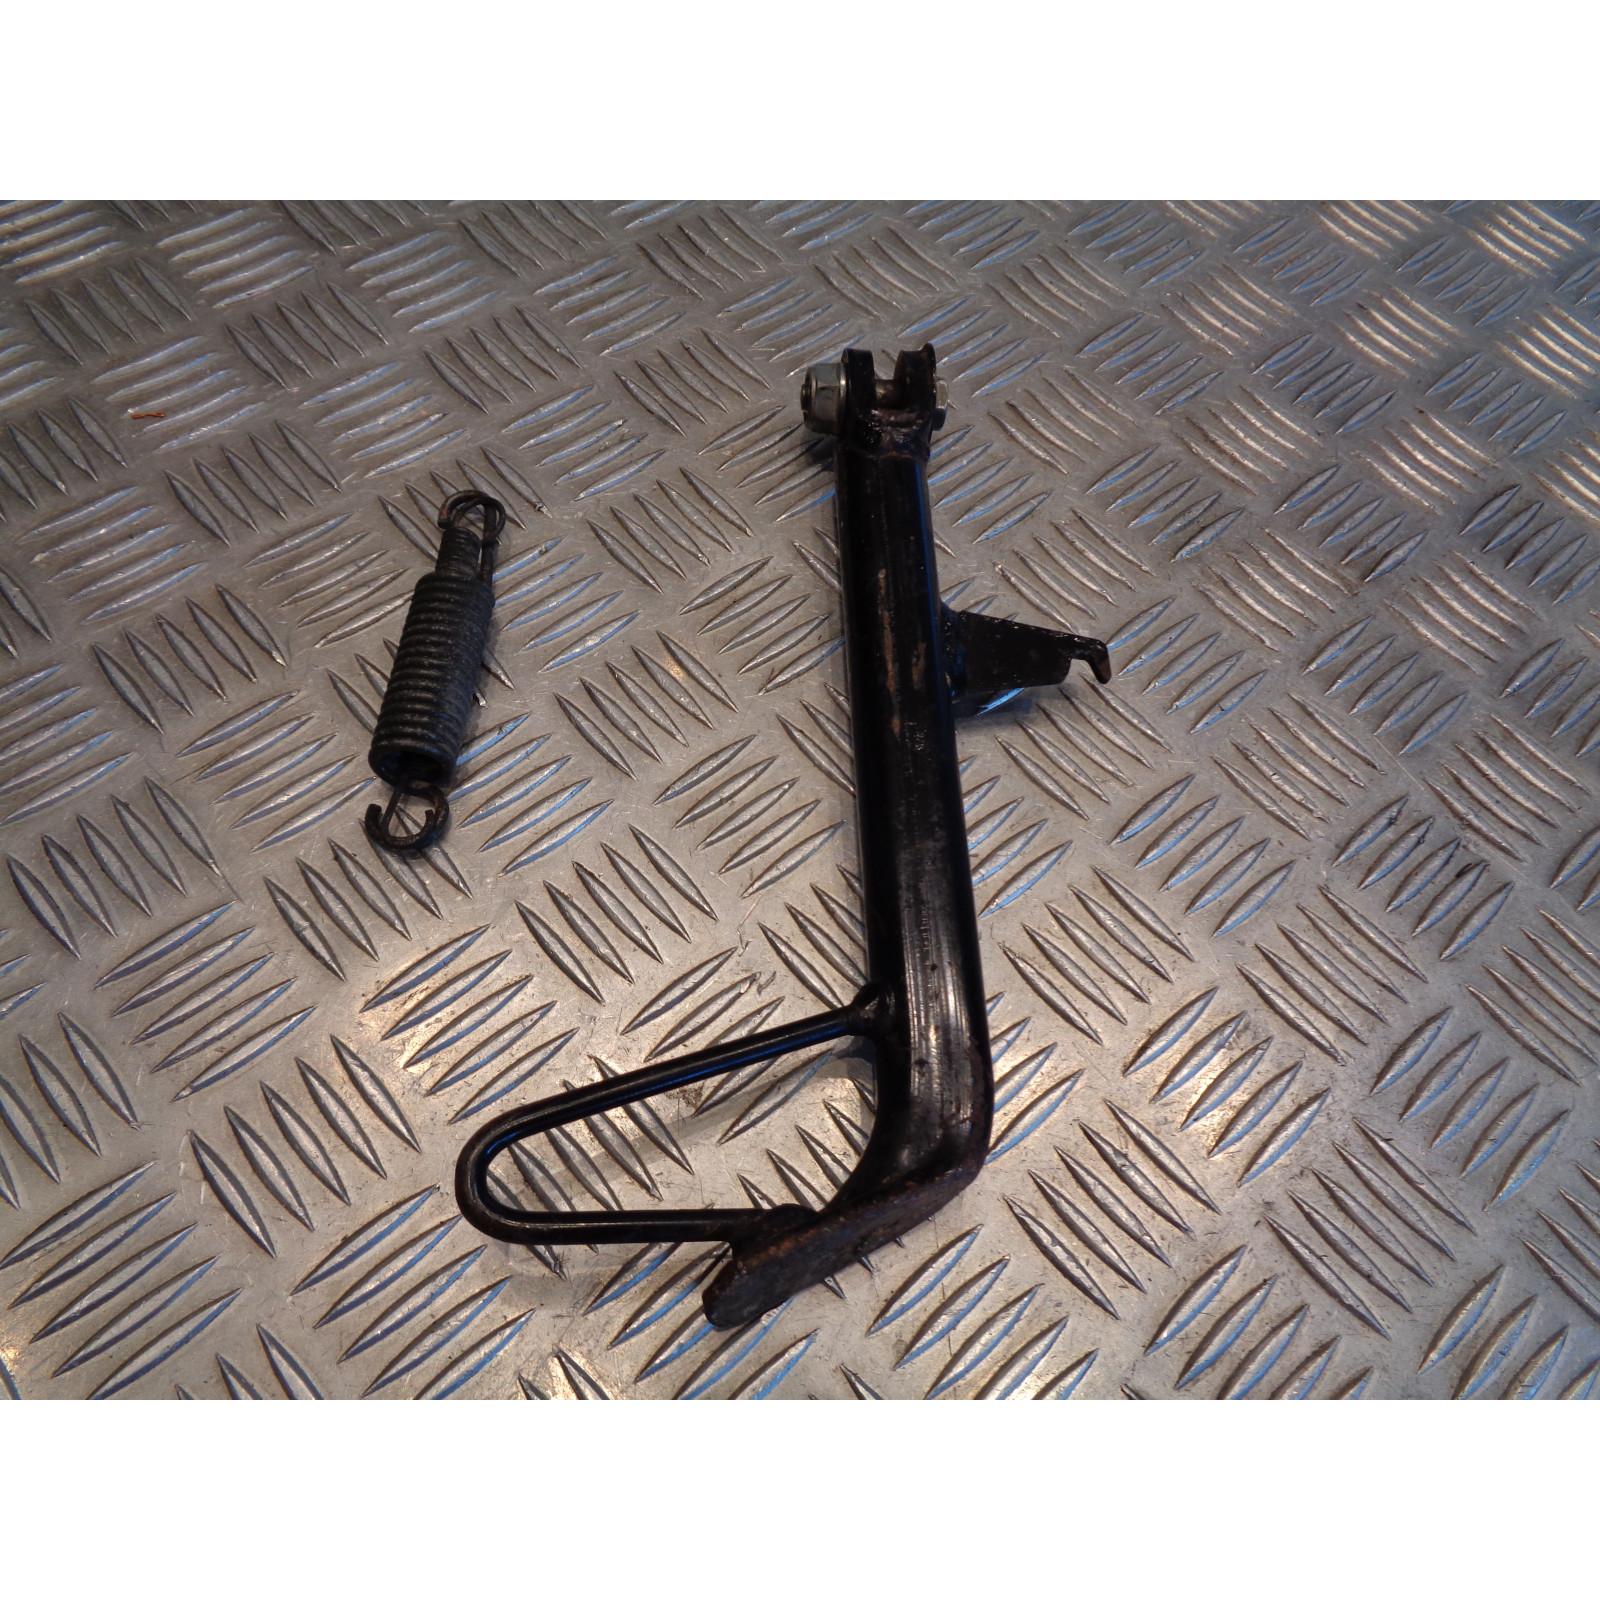 bequille laterale moto honda 125 cbr jc34a mlhjc34a